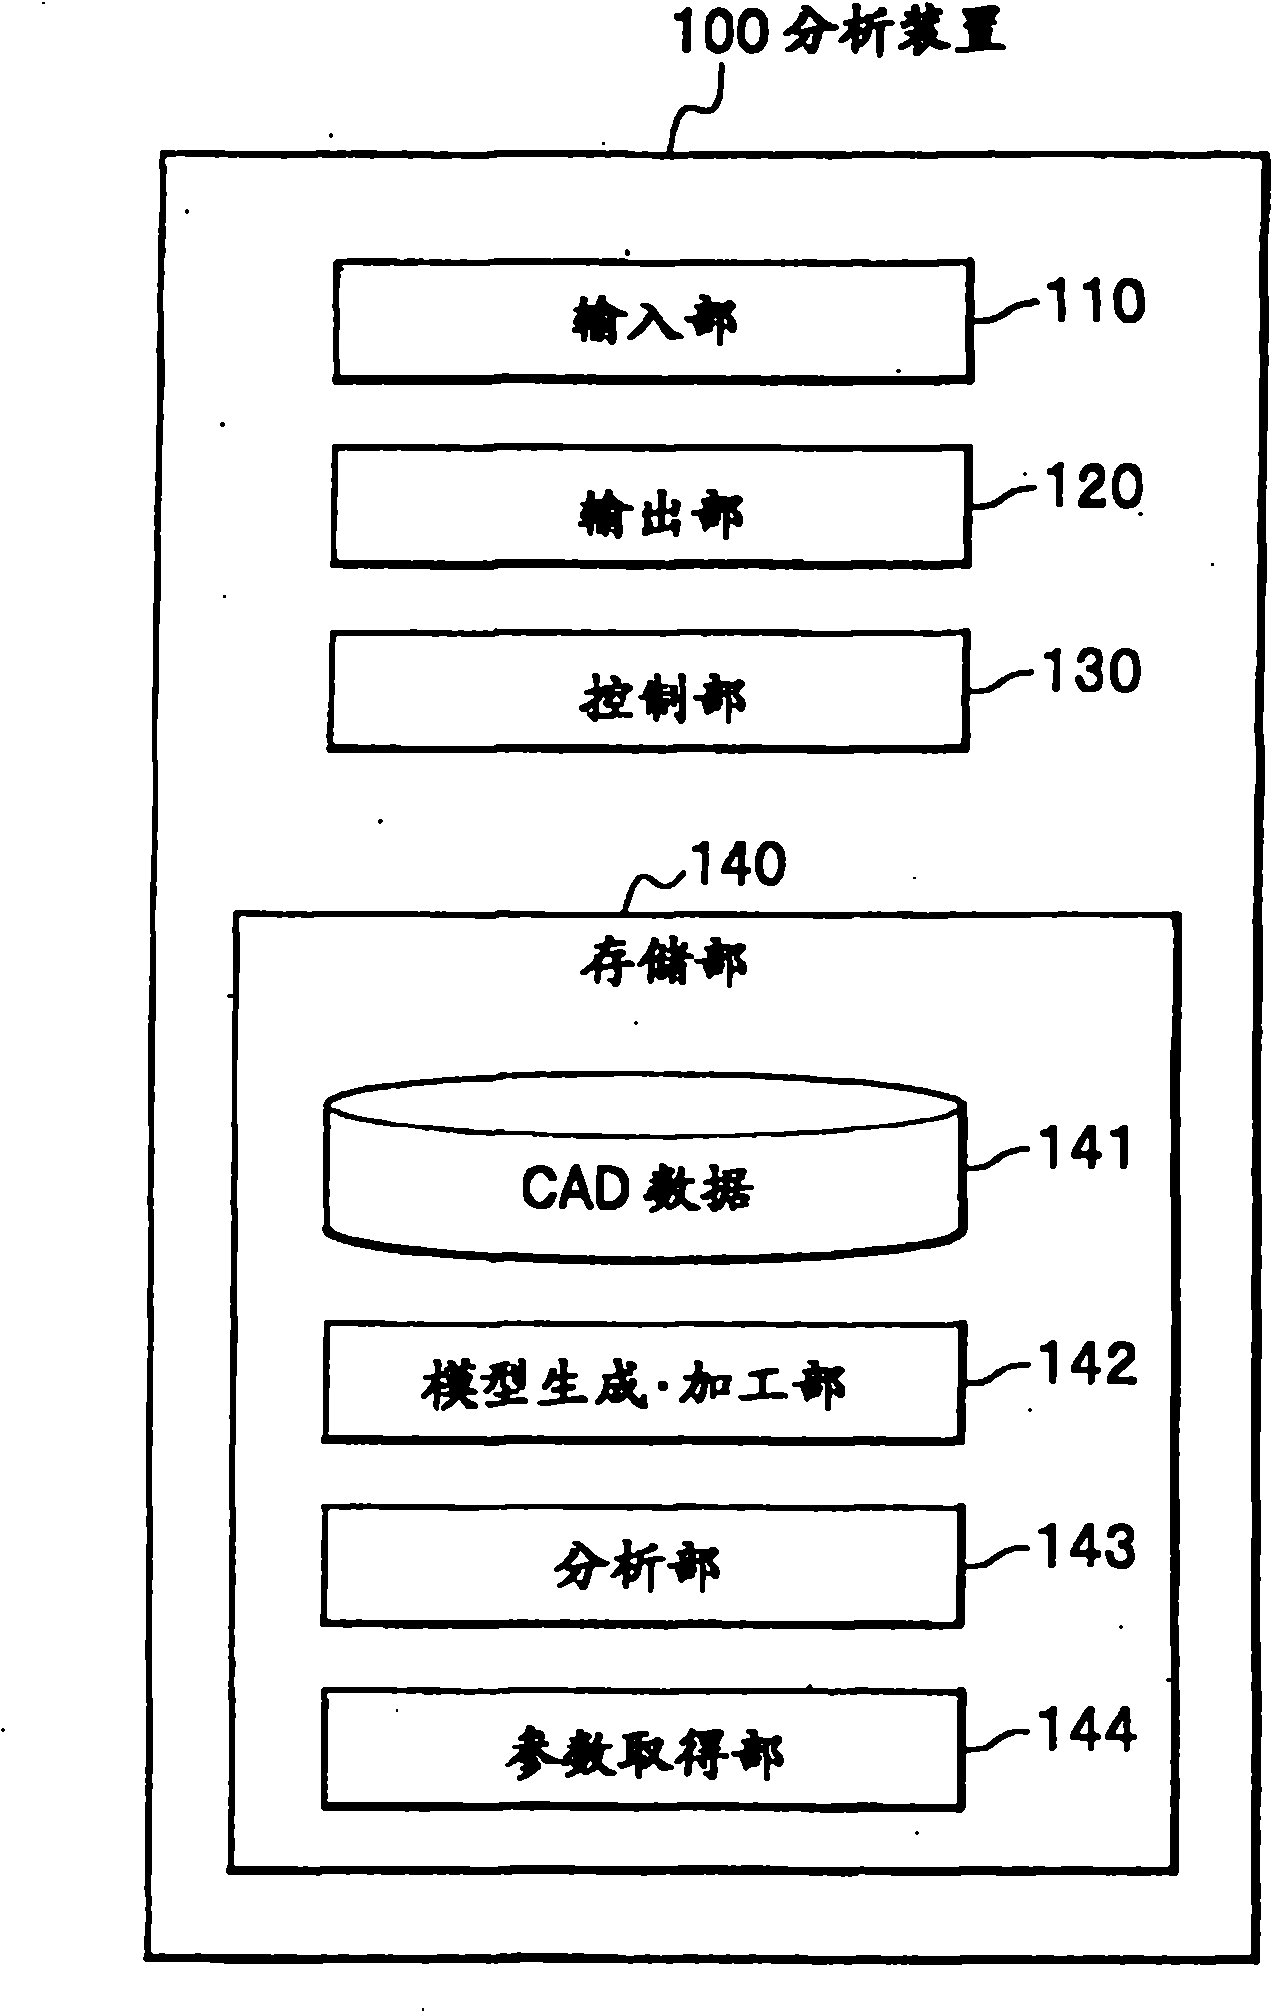 Method for simulation of welding distortion